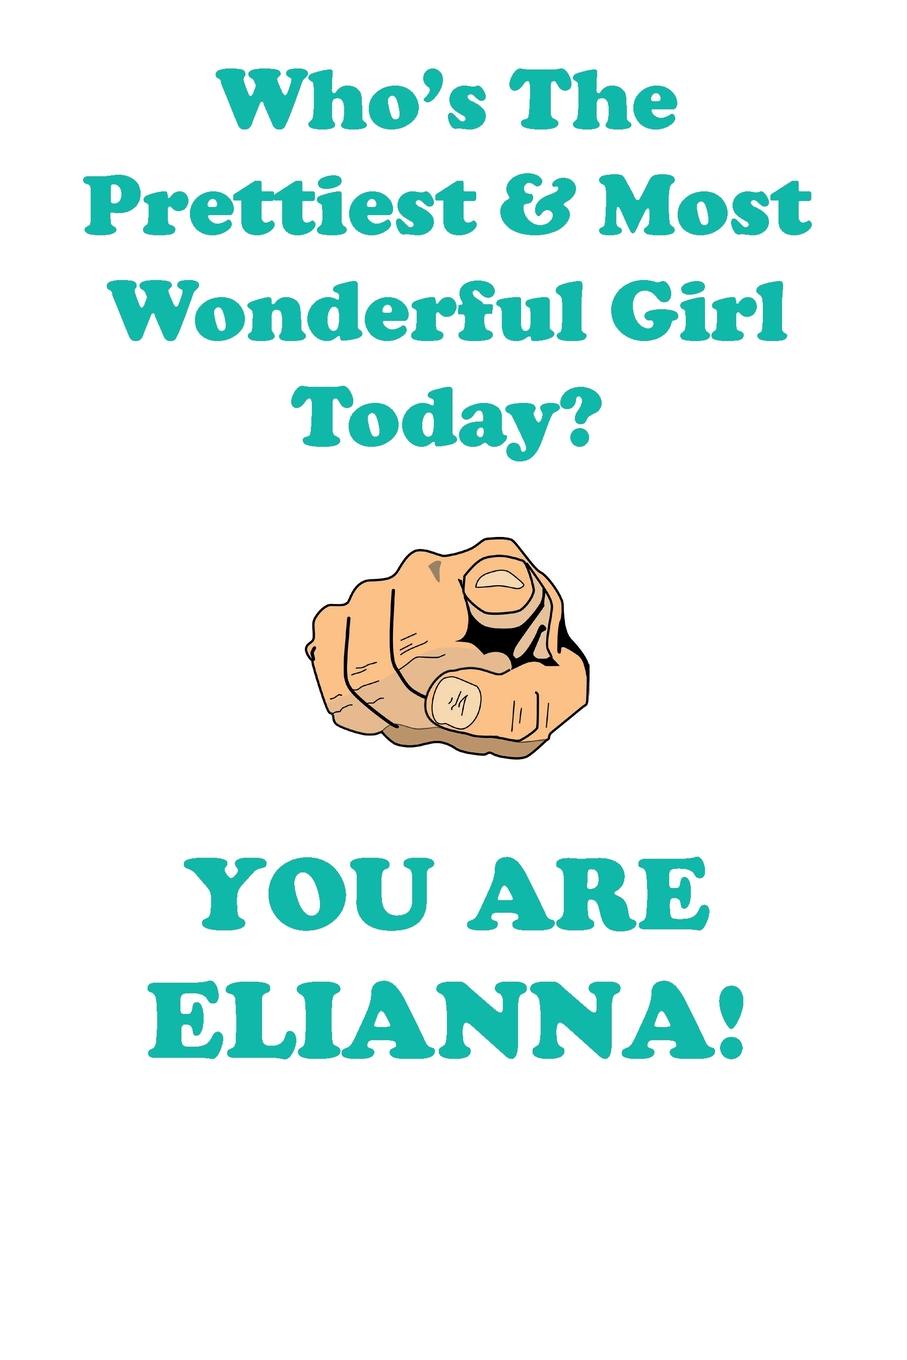 ELIANNA is The Prettiest Affirmations Workbook Positive Affirmations Workbook Includes. Mentoring Questions, Guidance, Supporting You